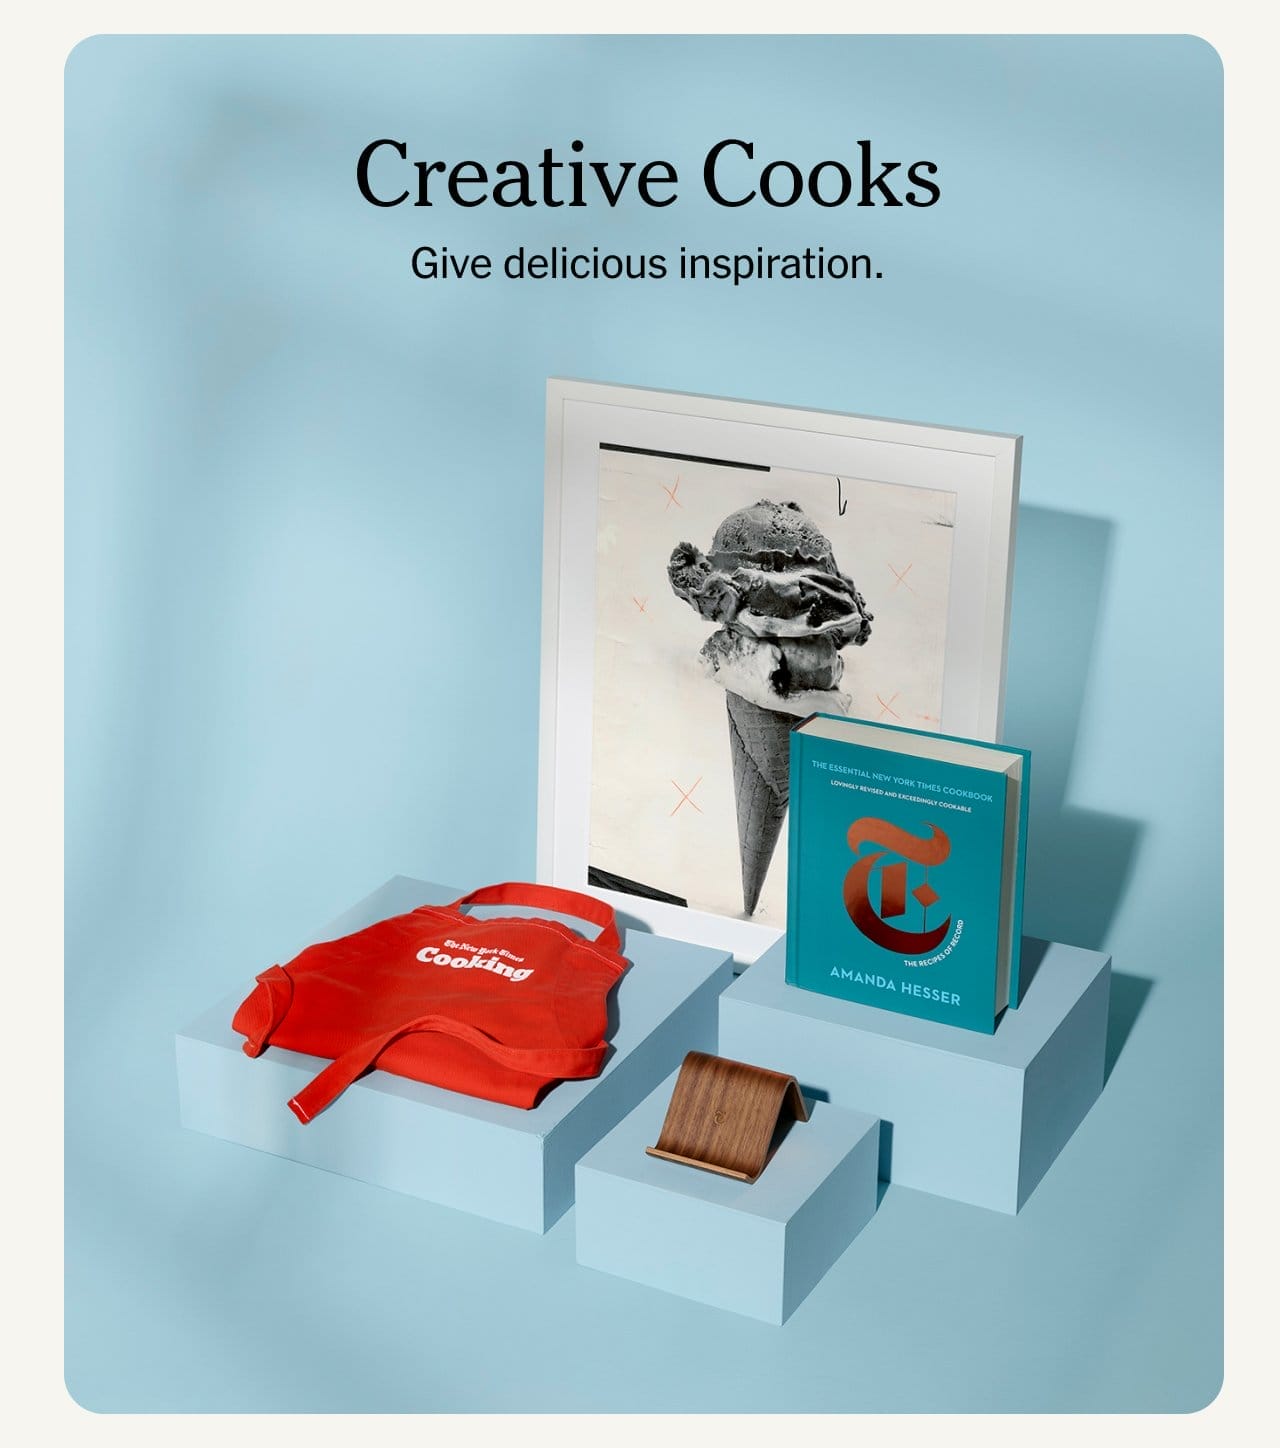 Creative Cooks. Give delicious inspiration.